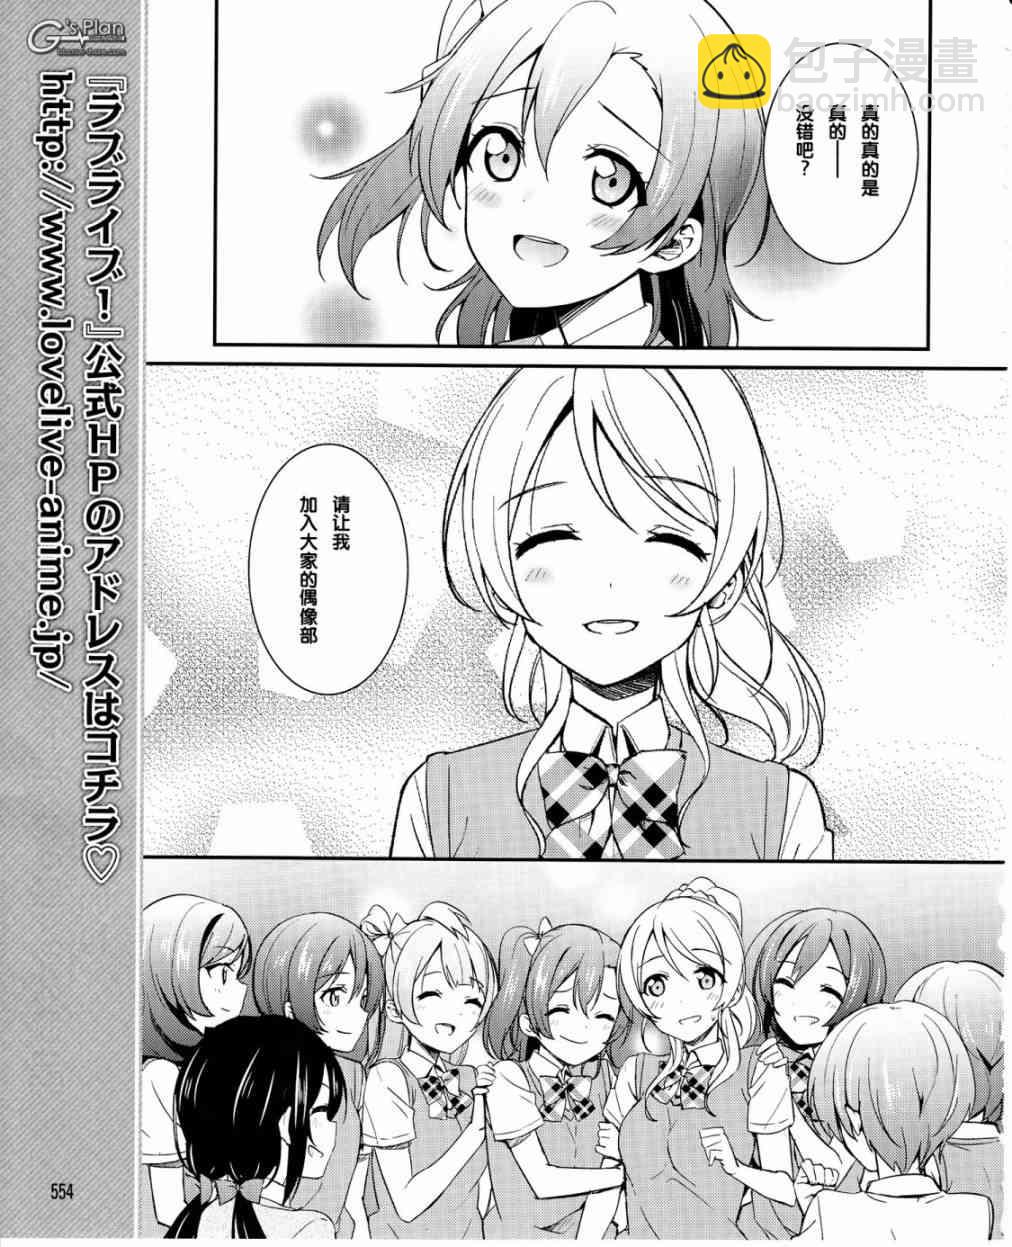 LoveLive - 21話 - 2